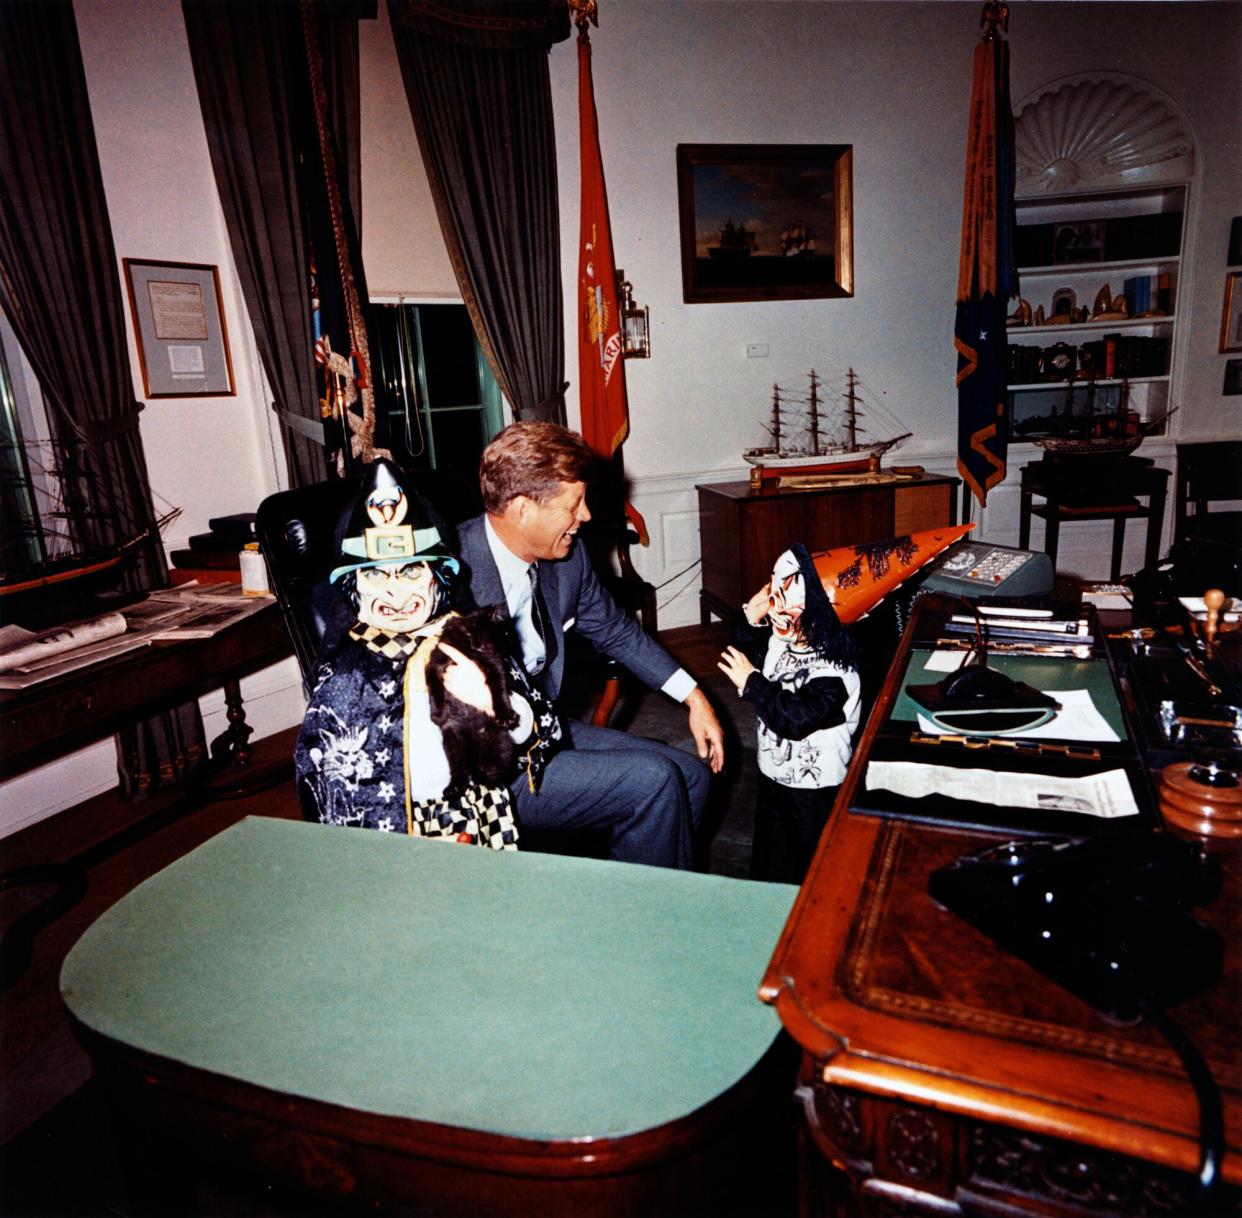 This photograph by Cecil Stoughton shows Caroline Kennedy and John F. Kennedy, Jr. visiting President John F. Kennedy in the Oval Office on Halloween in their costumes.